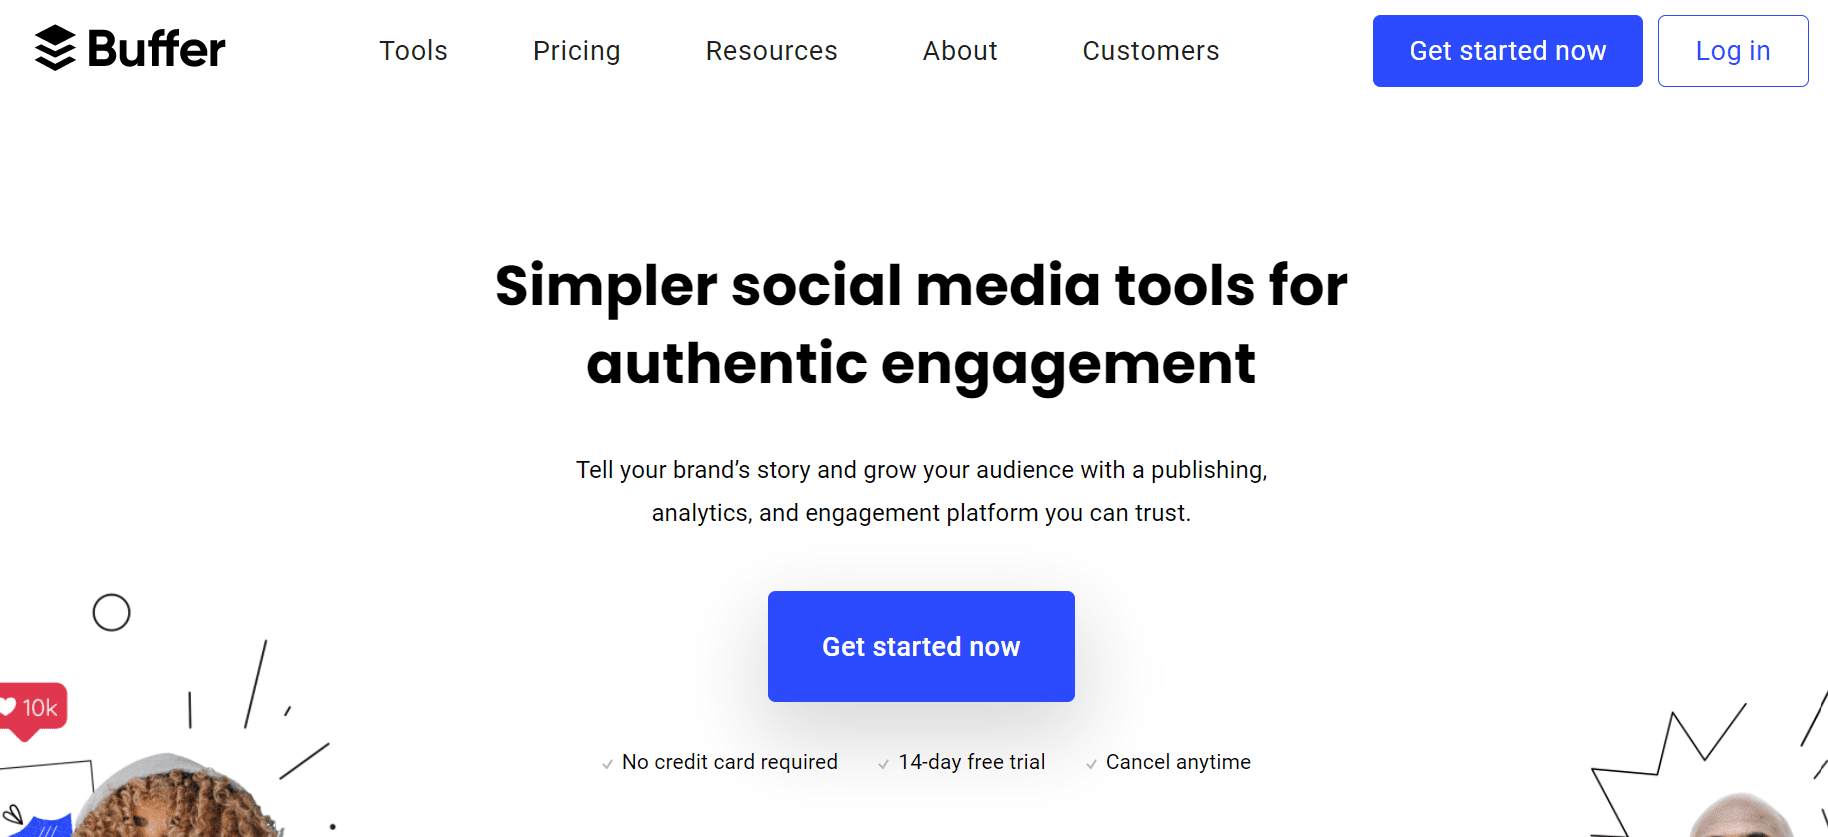 Buffer Overview - Social Media Automation Tools